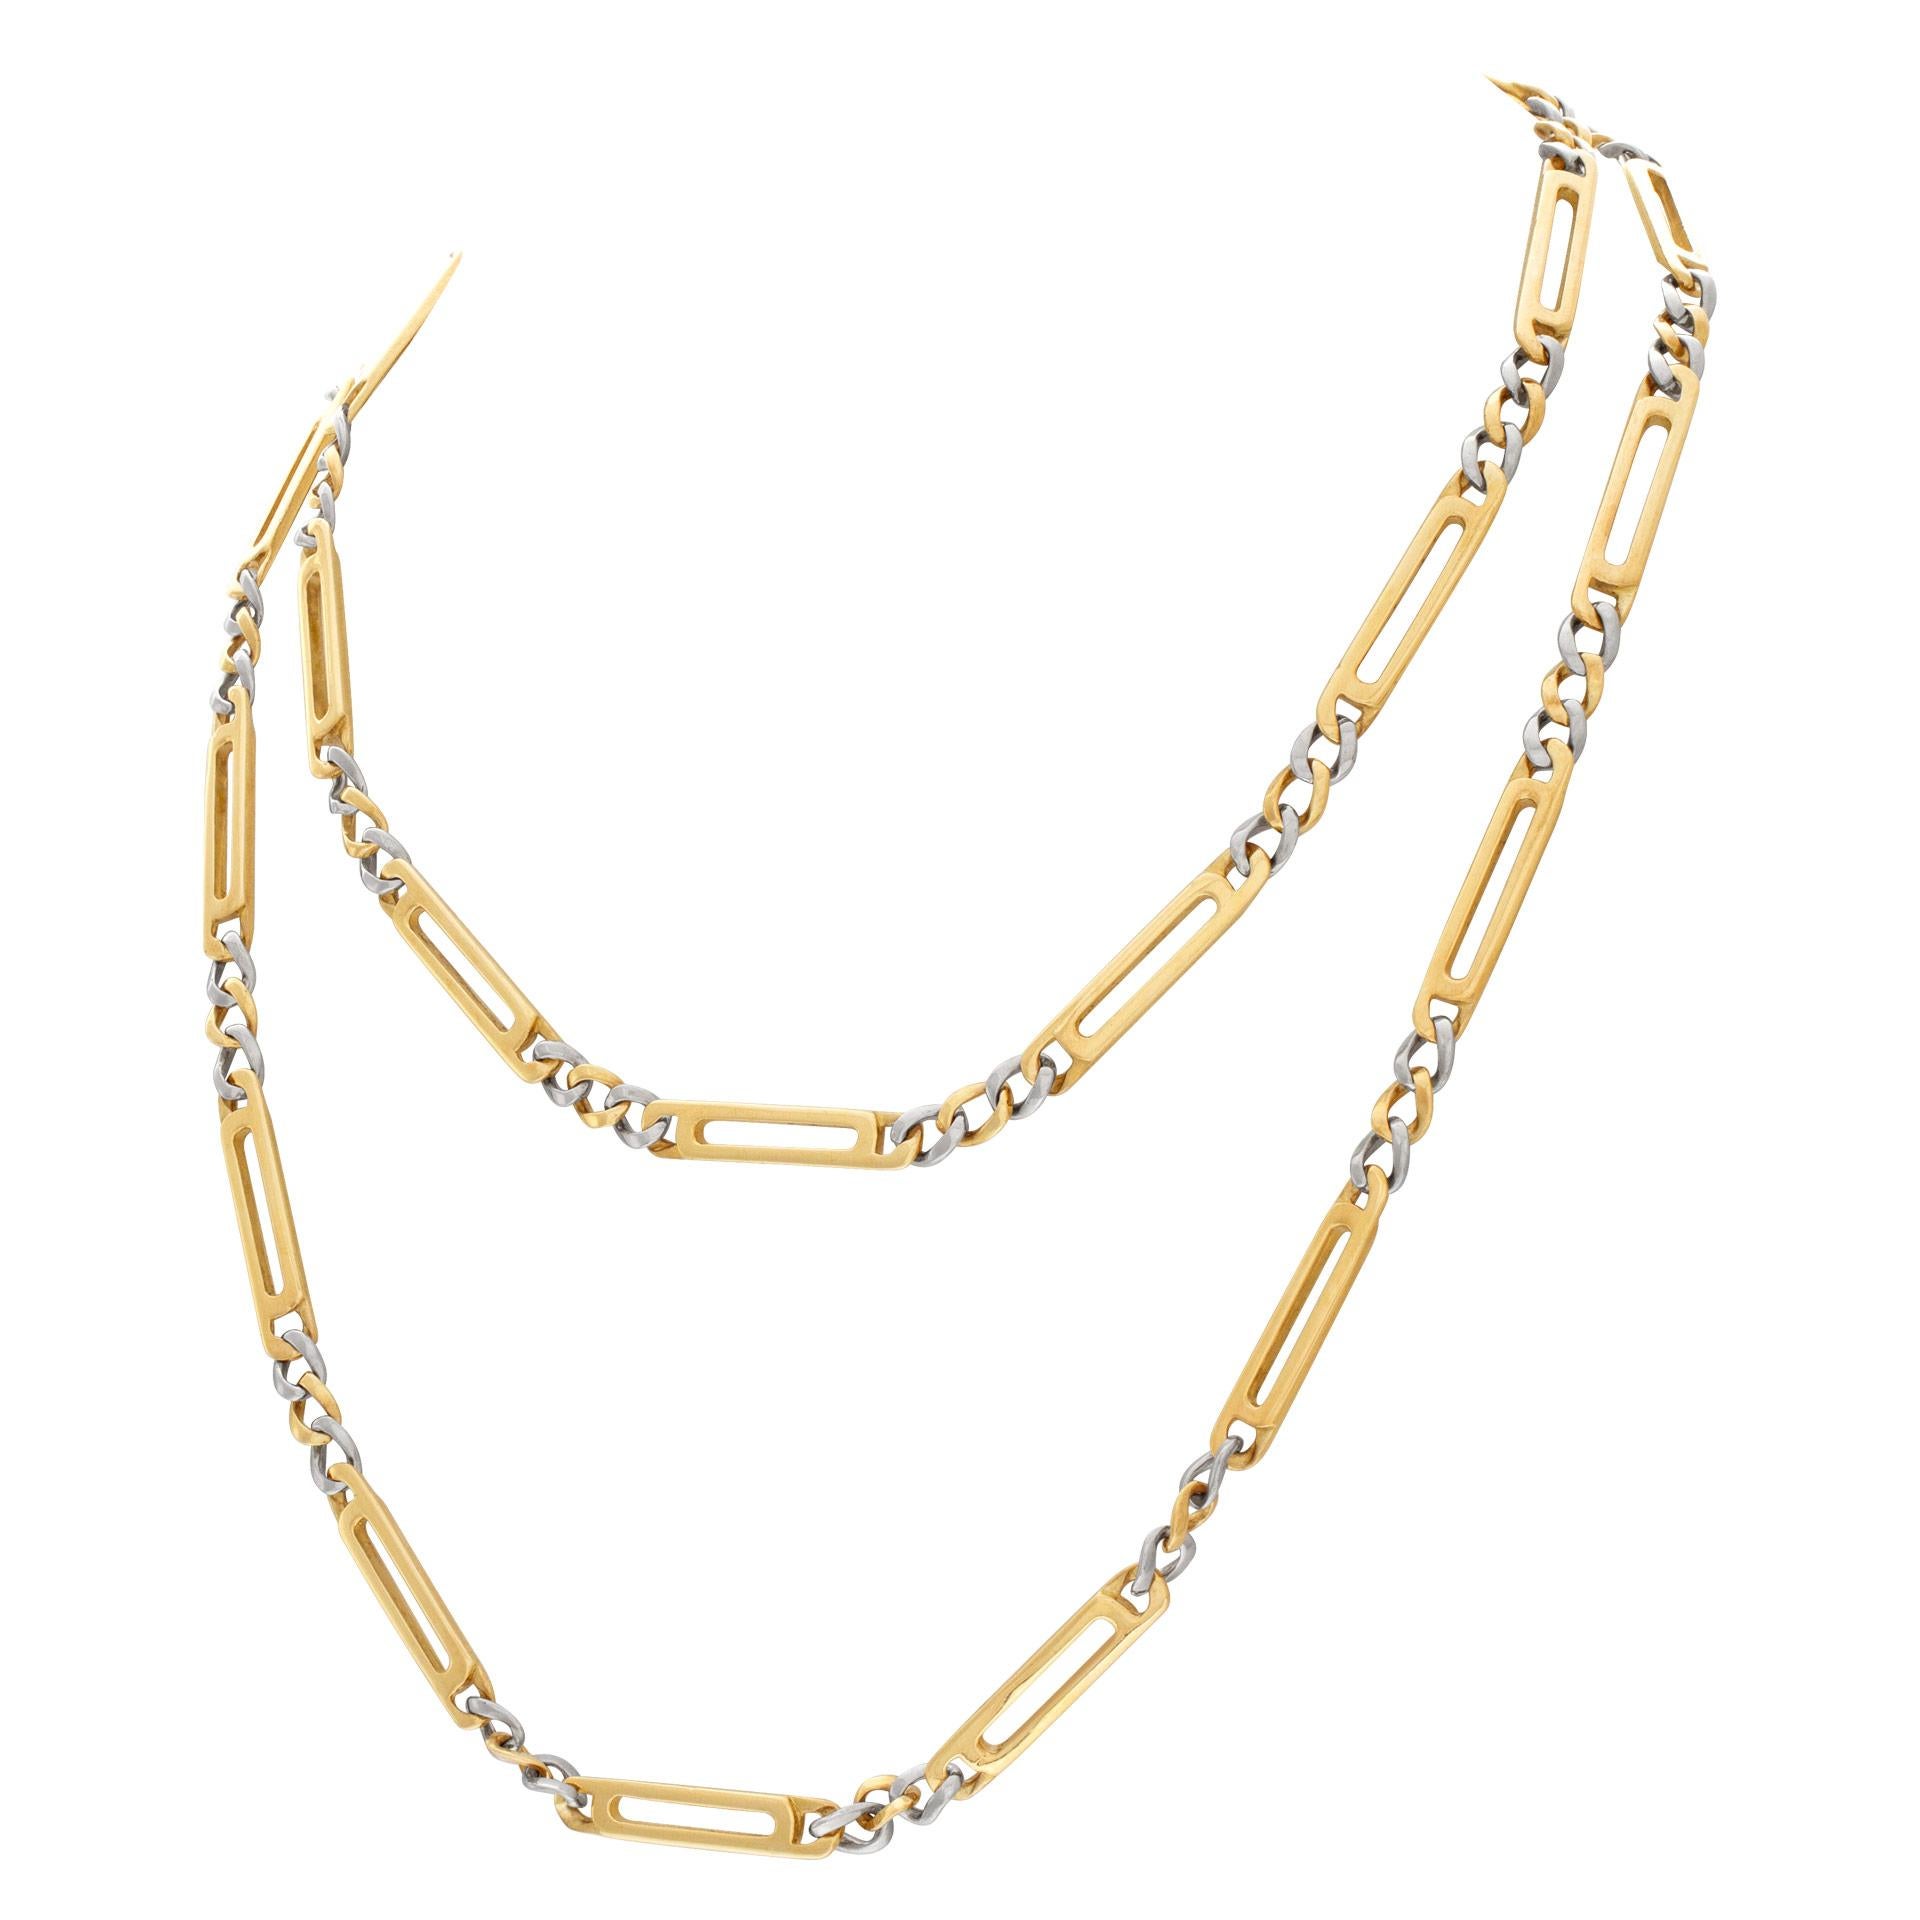 Unique Figaro link necklace in 18k white and yellow gold. 36